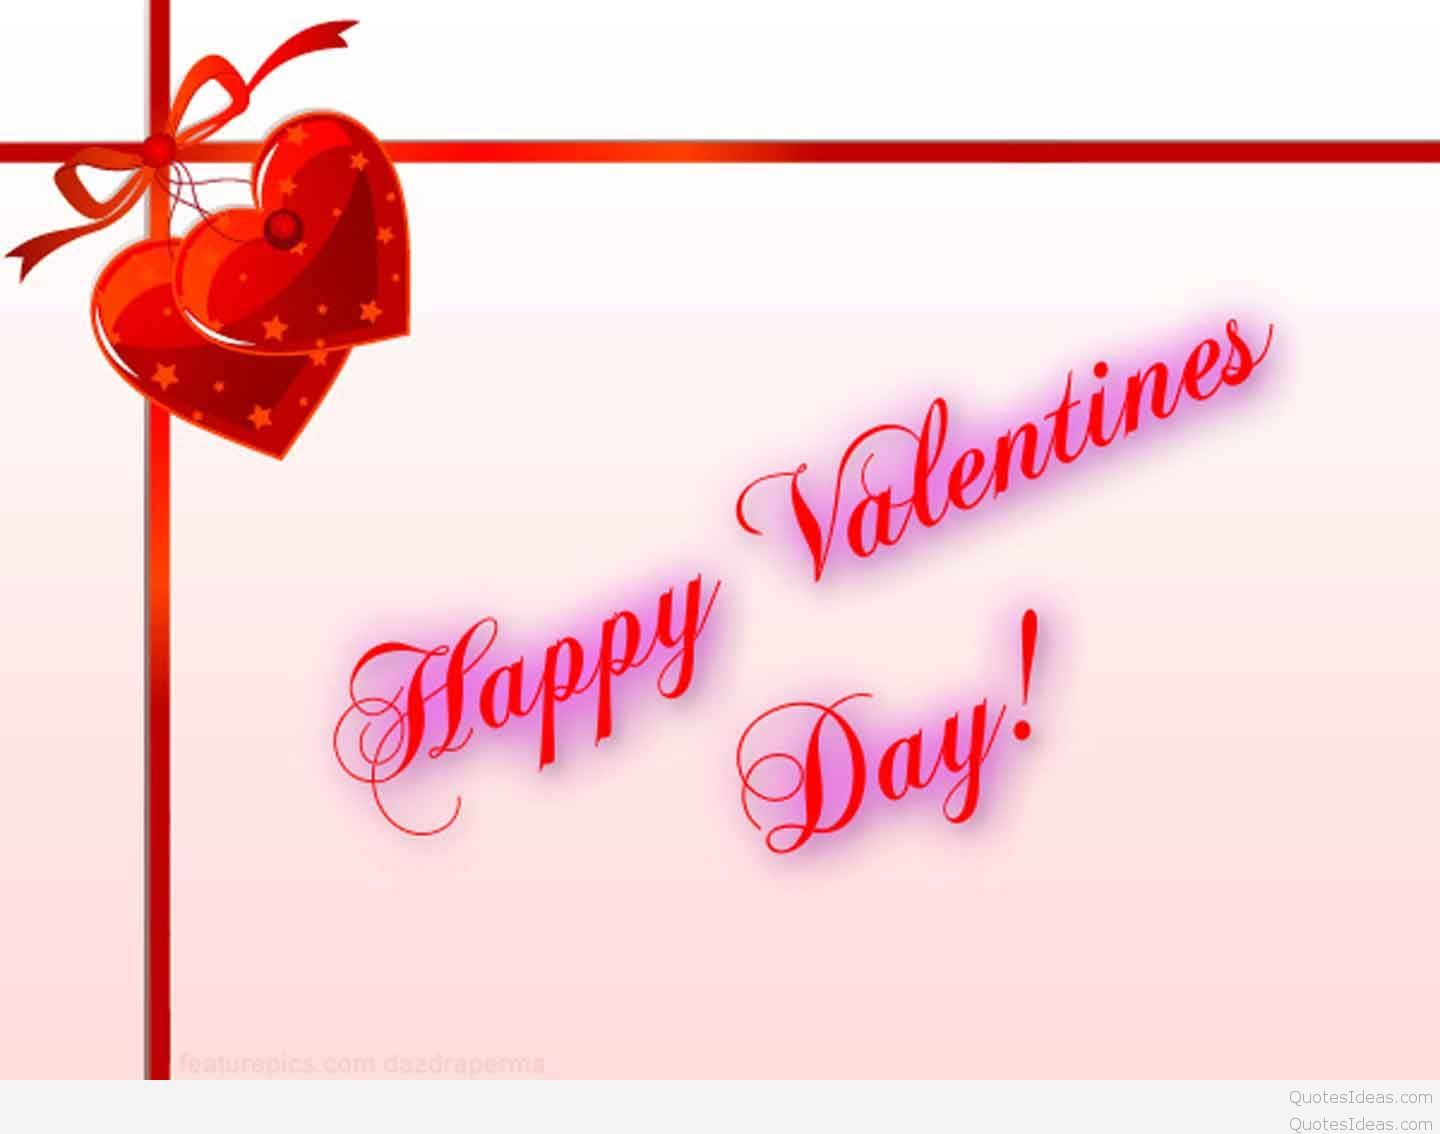 Cute Card Happy Valentines Day Wish Image Day Image New